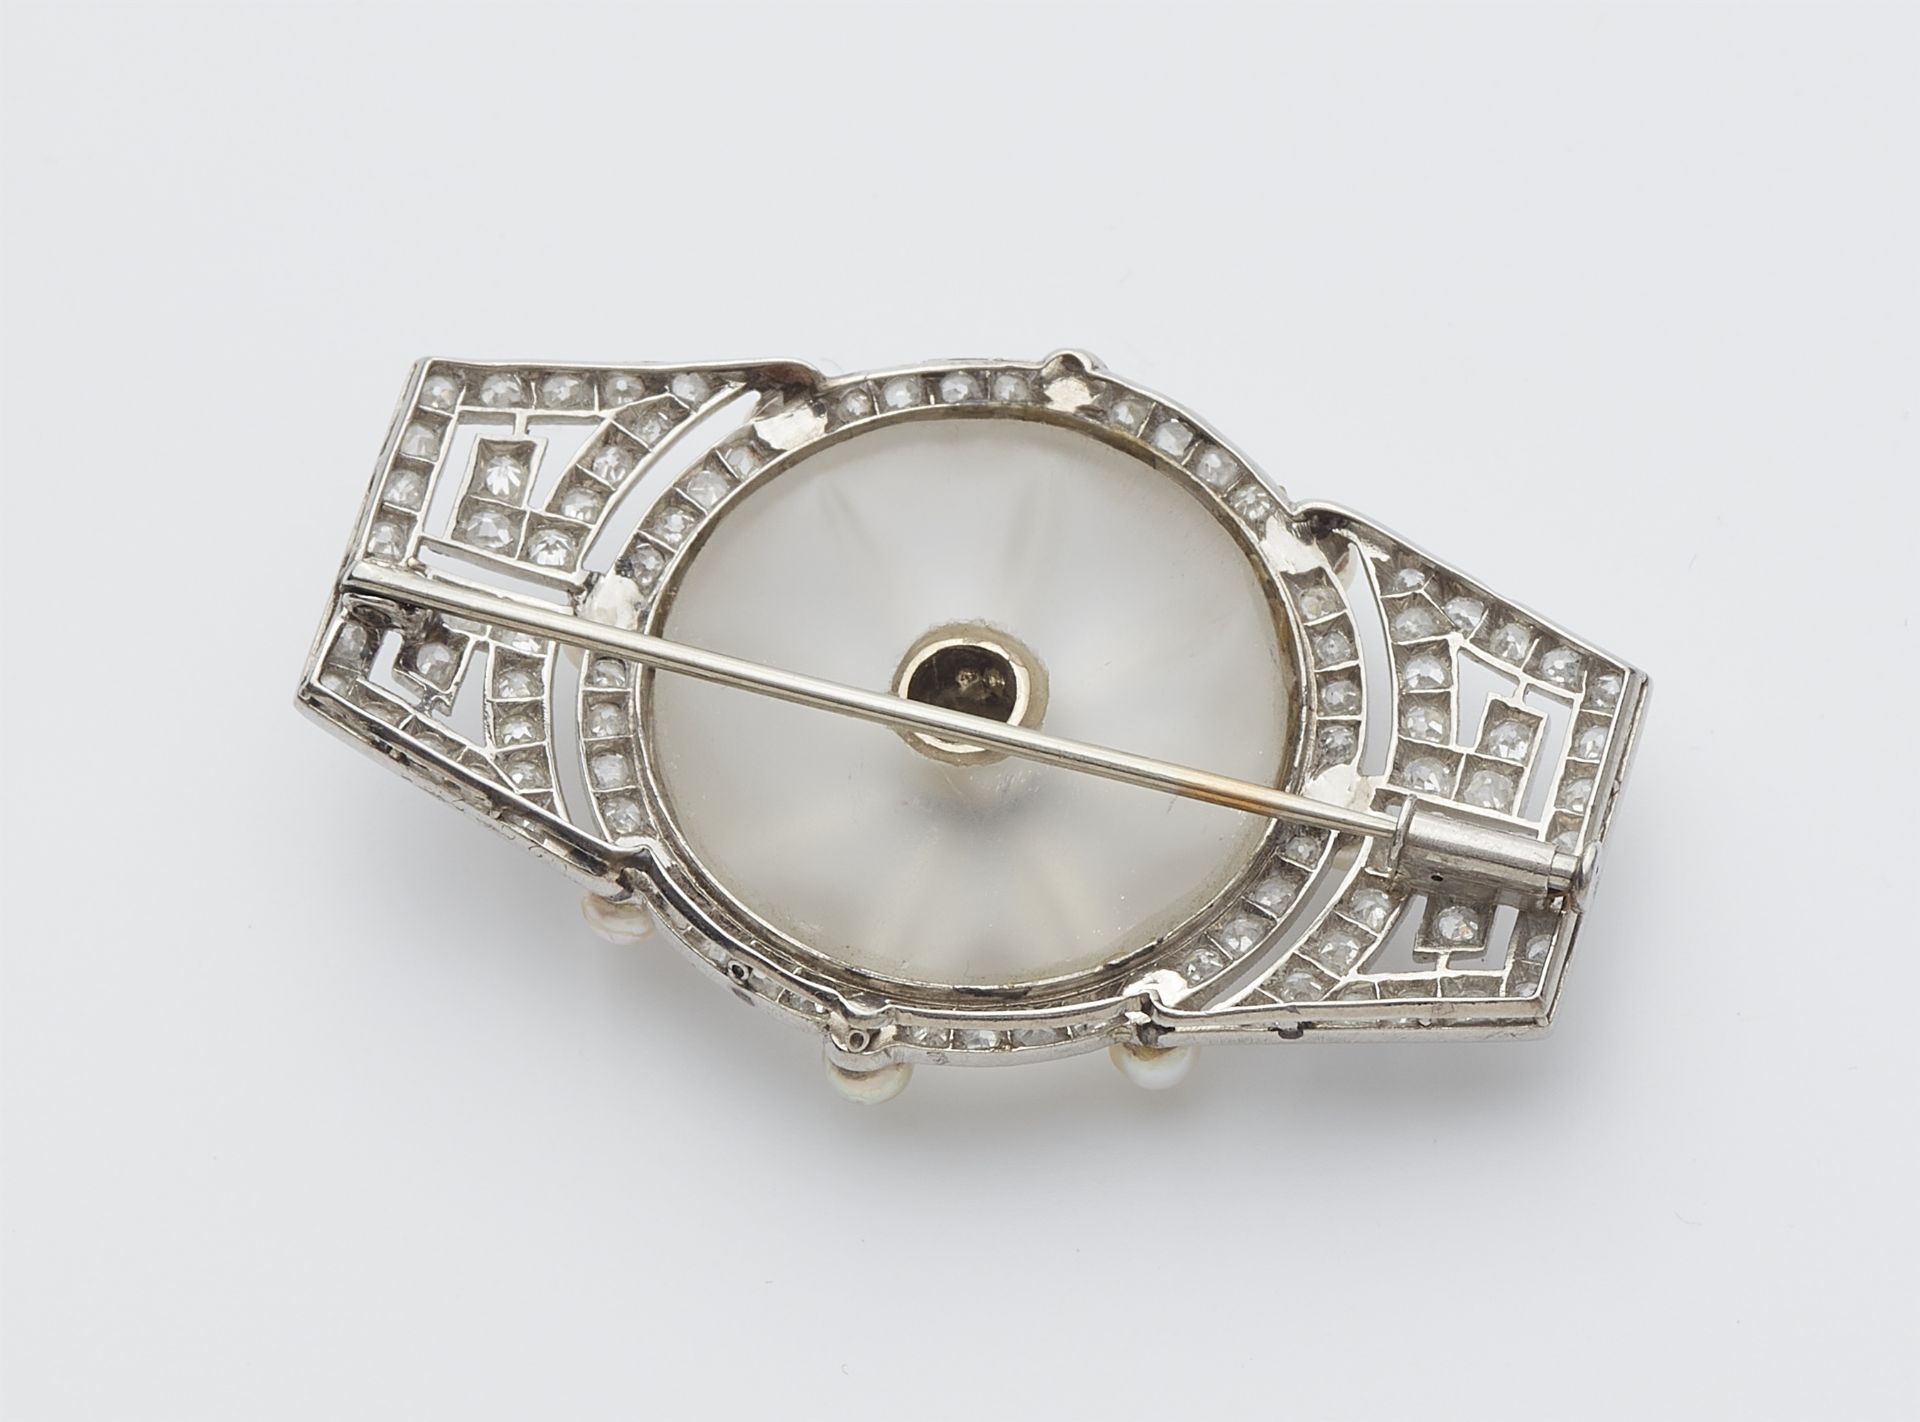 A French Art Déco platinum enamel diamond and rock crystal brooch. - Image 2 of 2